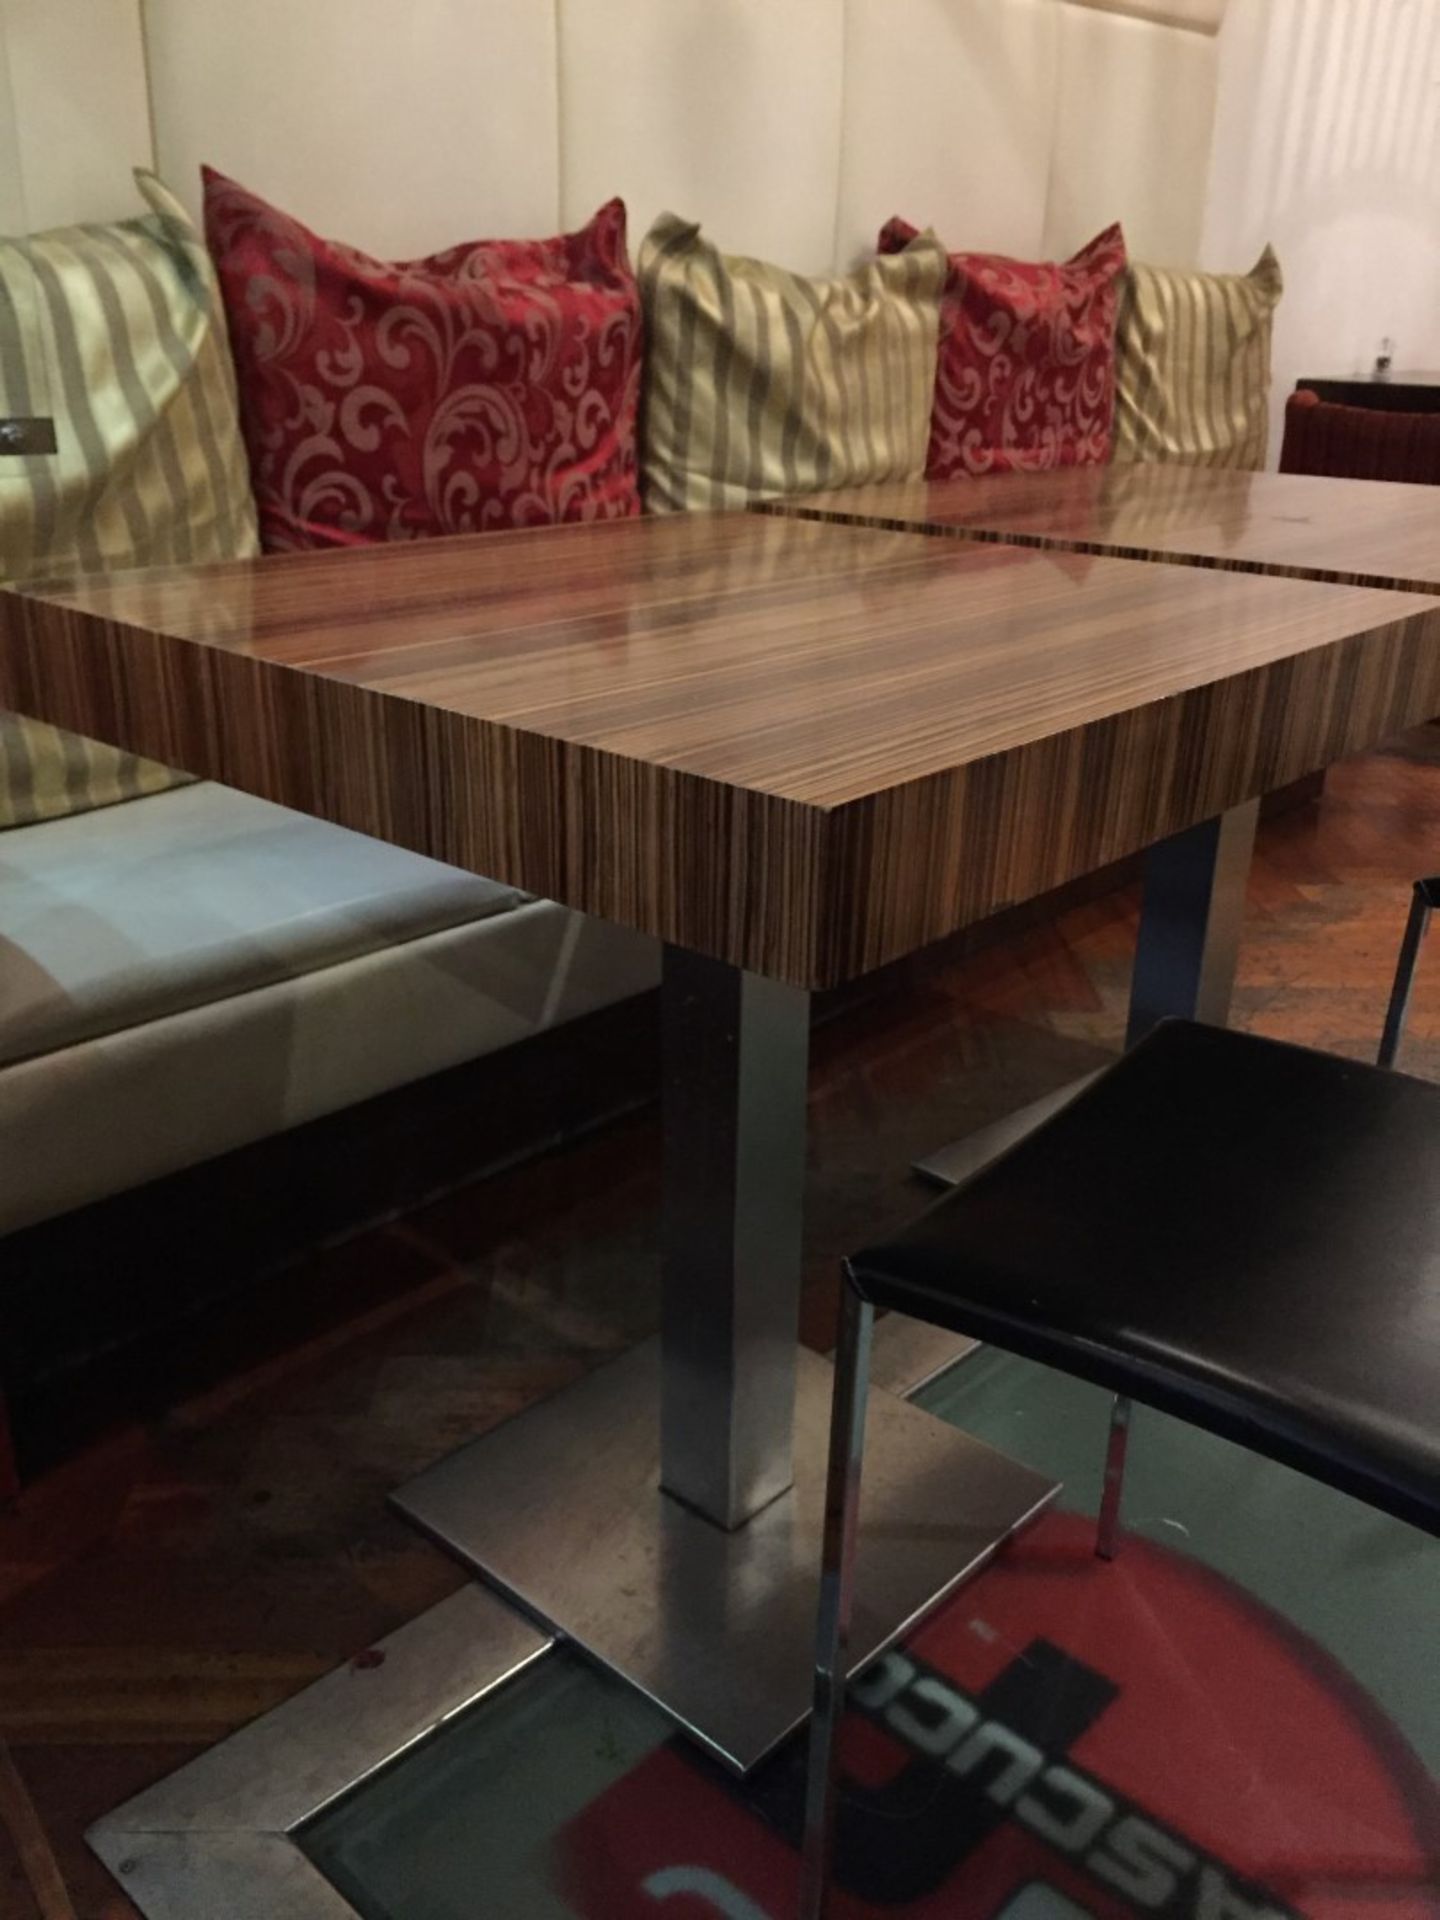 2 x Modern Zebrawood Bistro Tables - Substantial Chrome Base With Zebrawood Tops - H76 x W70 x D70cm - Image 4 of 7